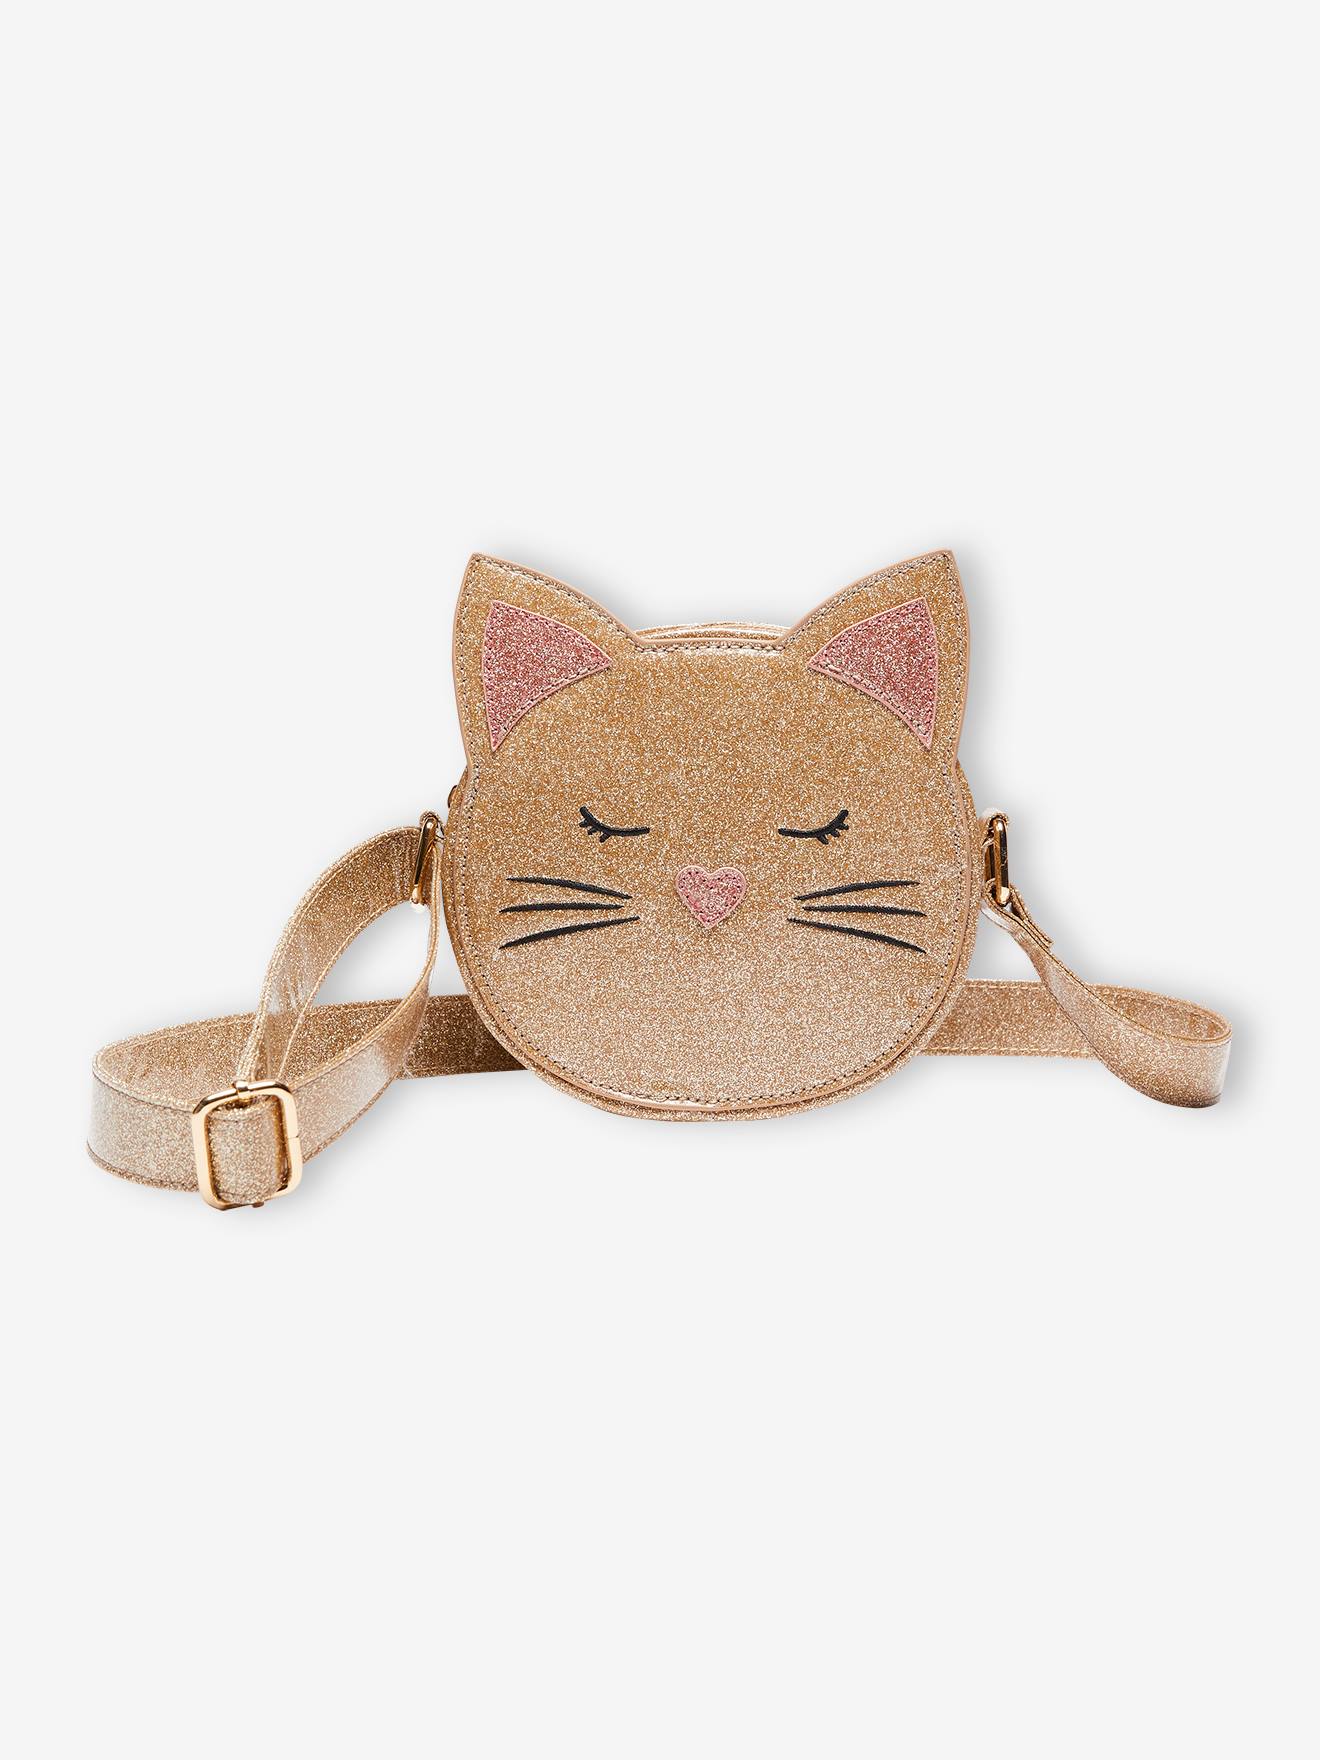 Sac rond fille chat scintillant or